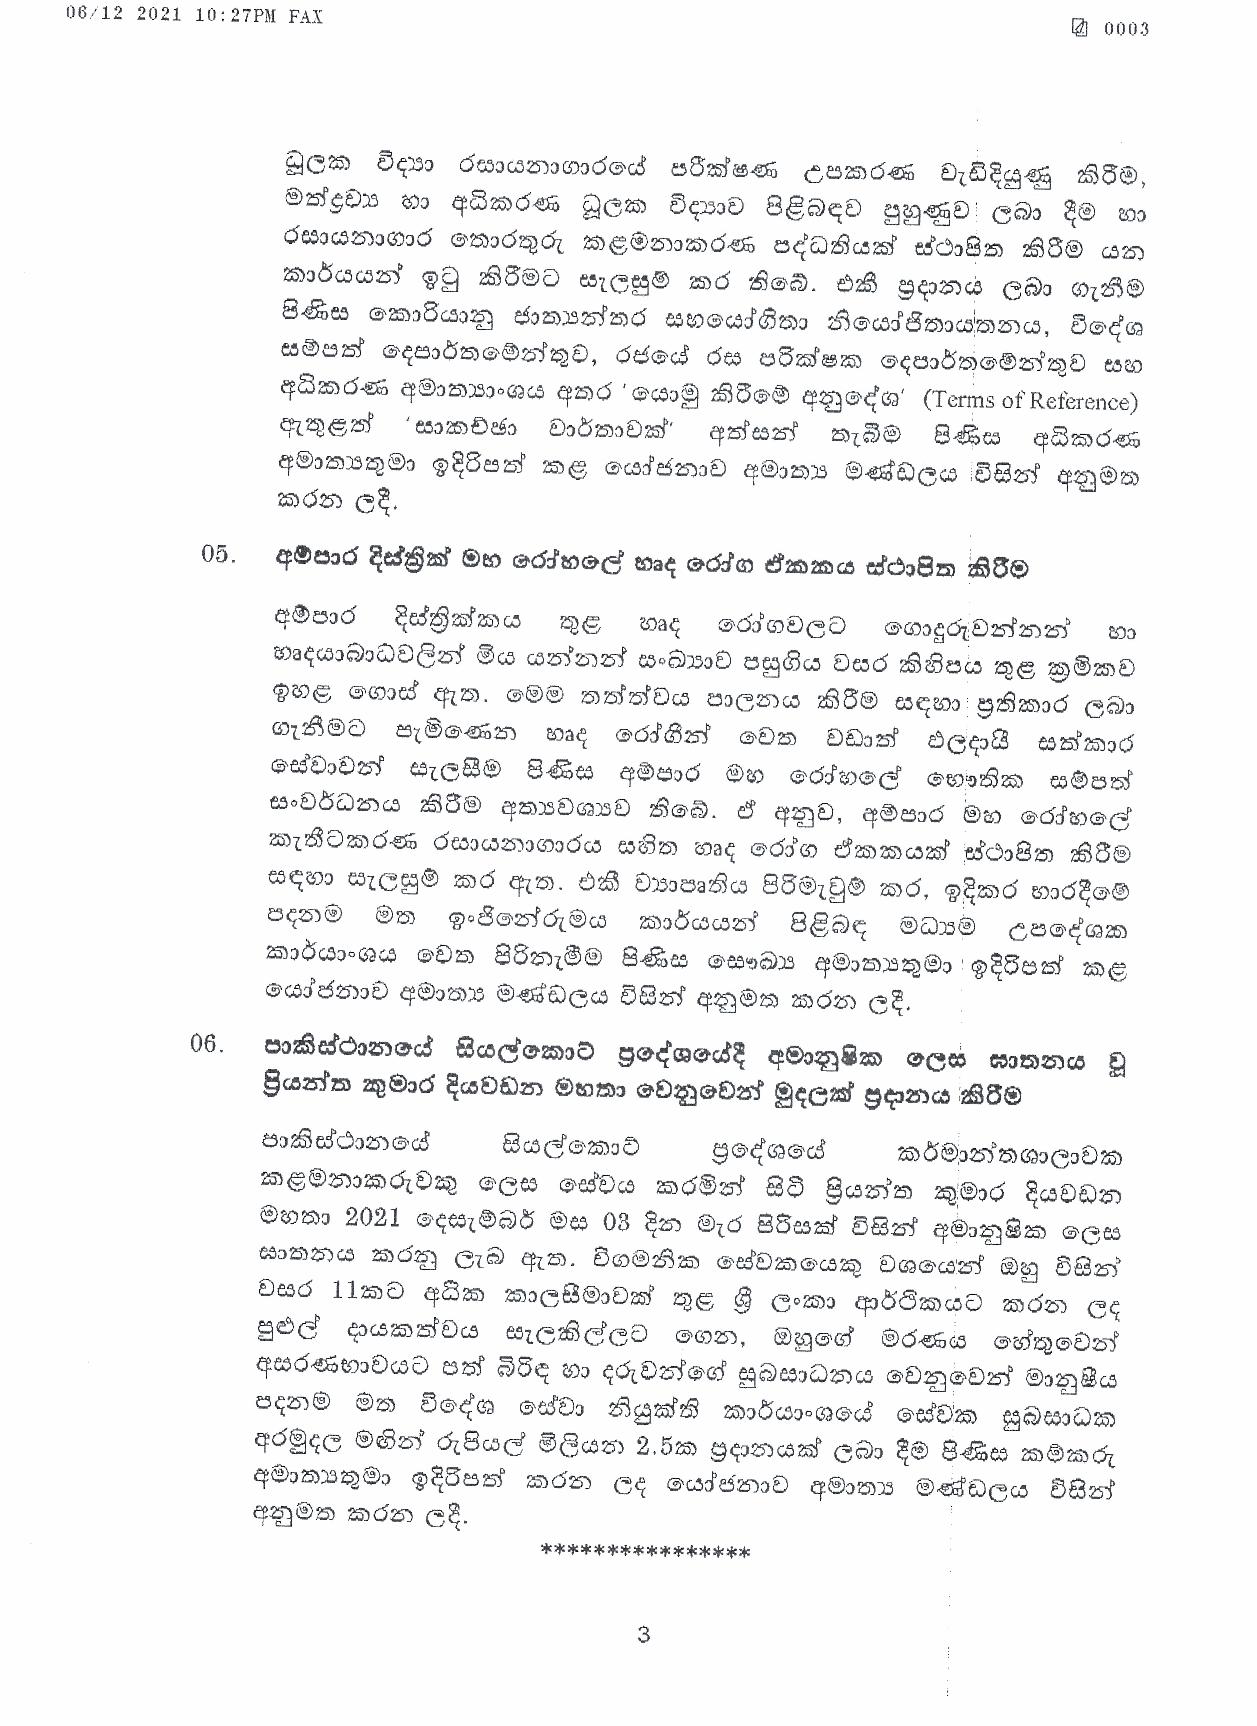 Cabinet Decision on 06.12.2021 page 003